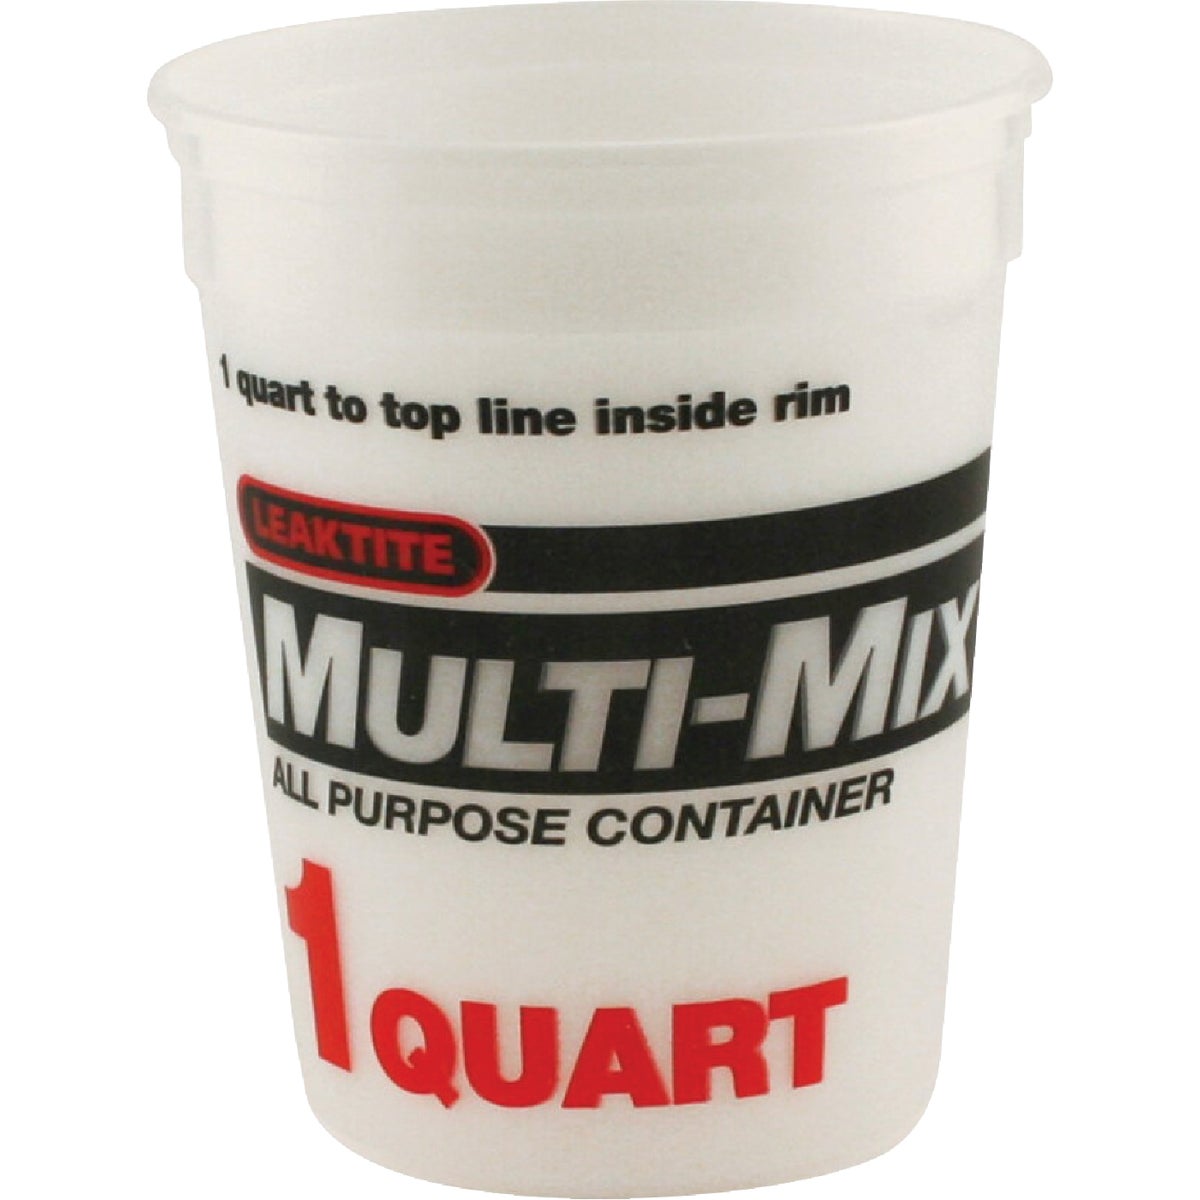 Leaktite 1 Qt. White Multi-Mix All Purpose Mixing And Storage Container